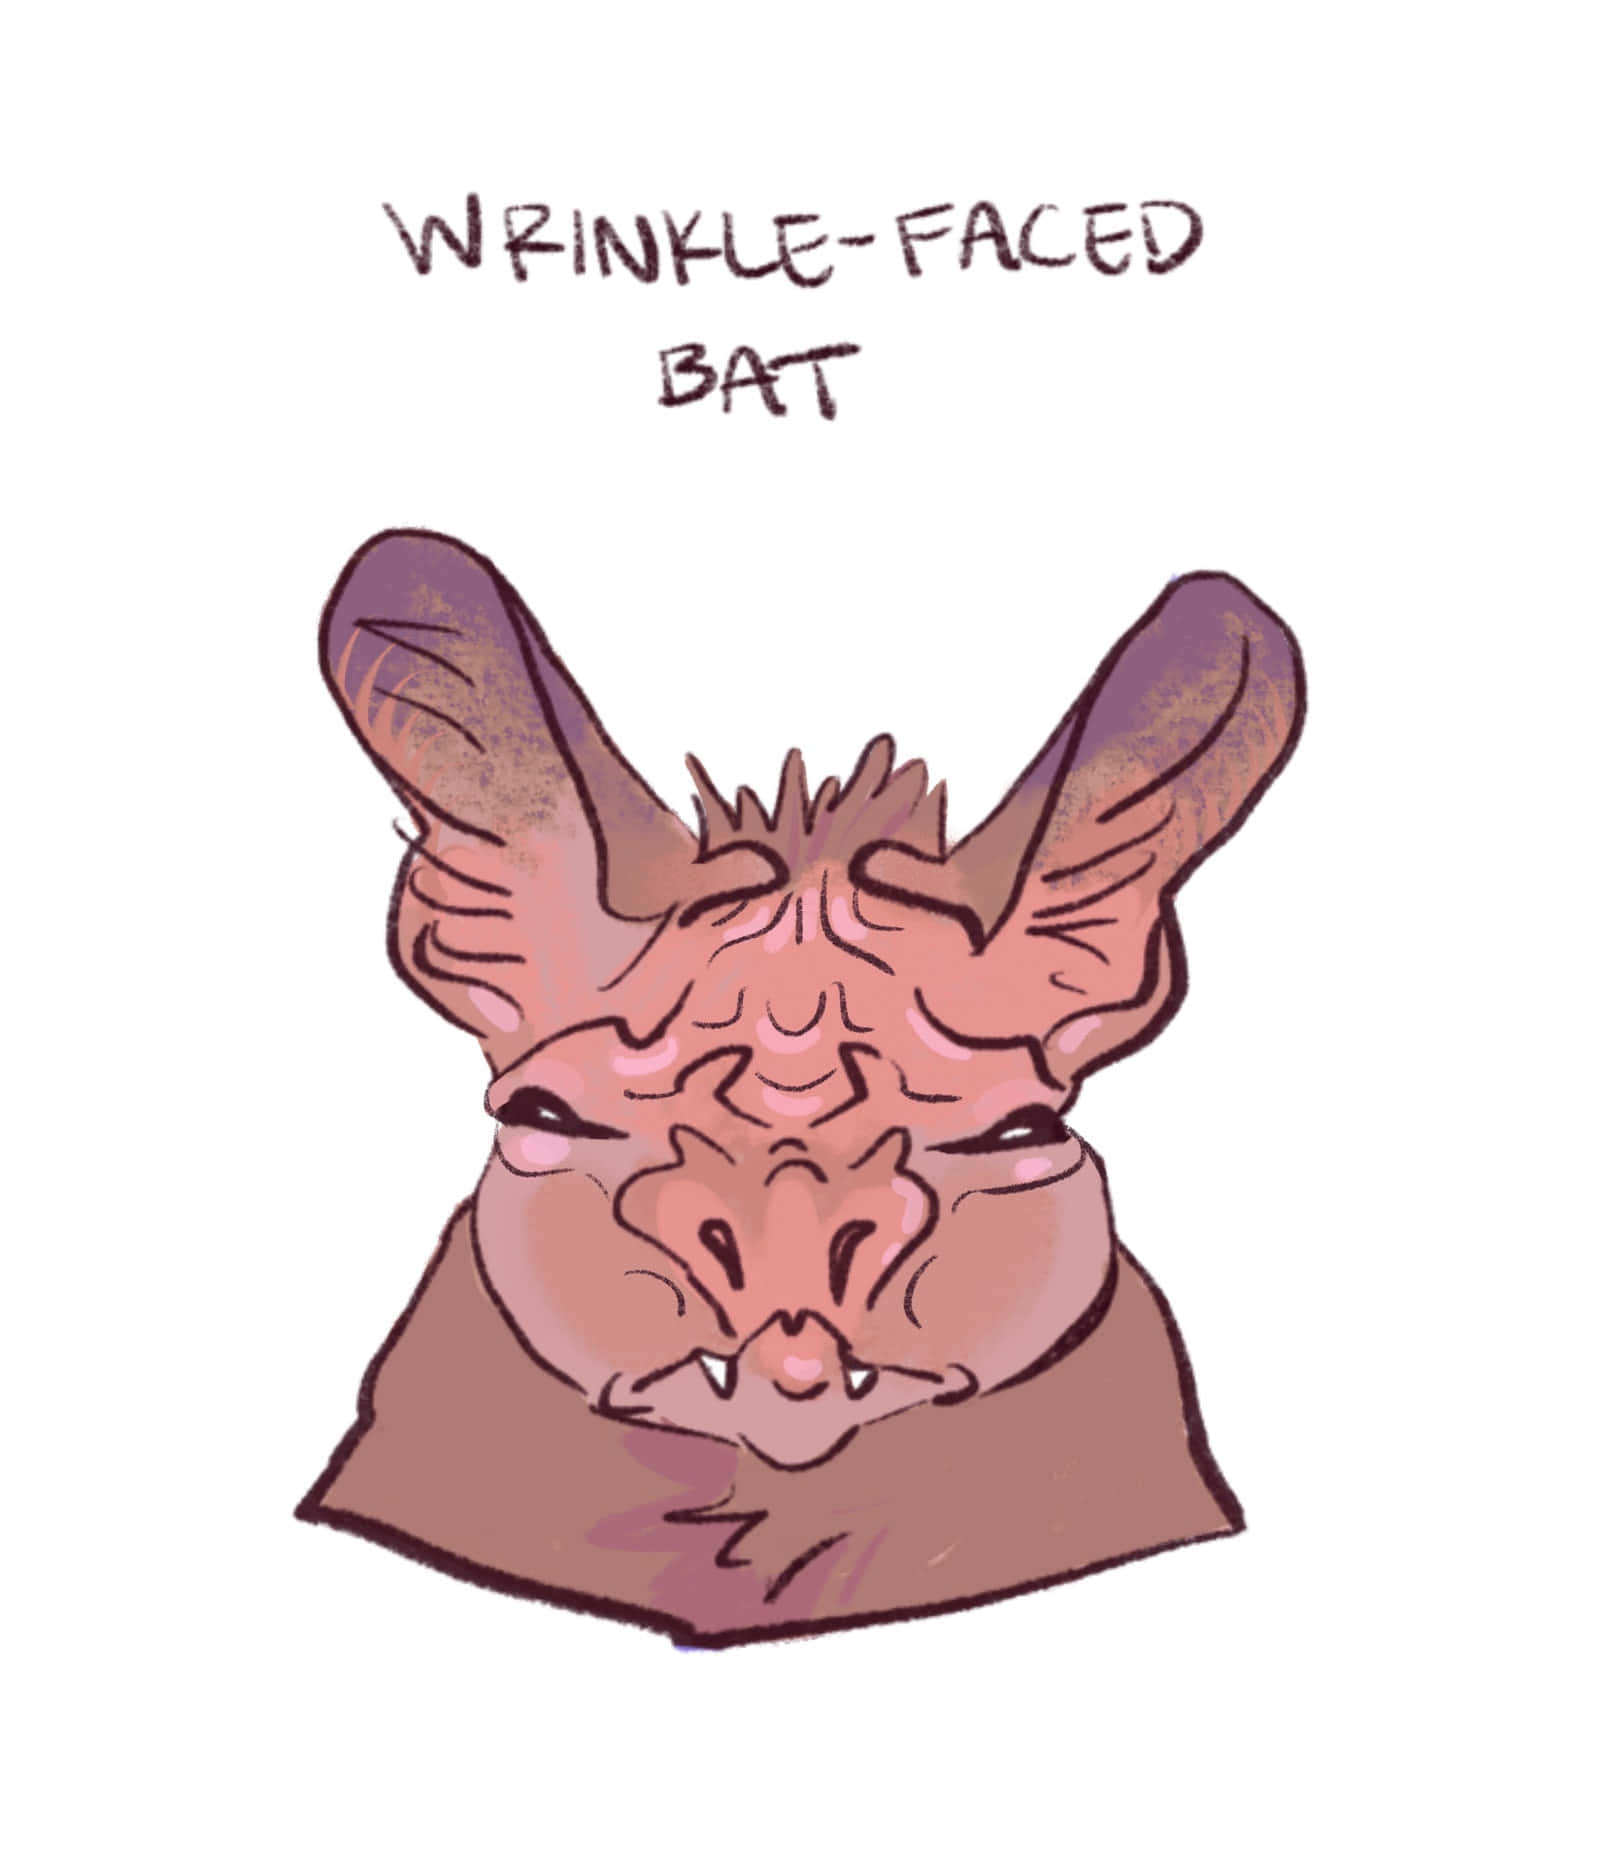 A Cartoon Of A Bat With The Words Wrinkle Faced Bat